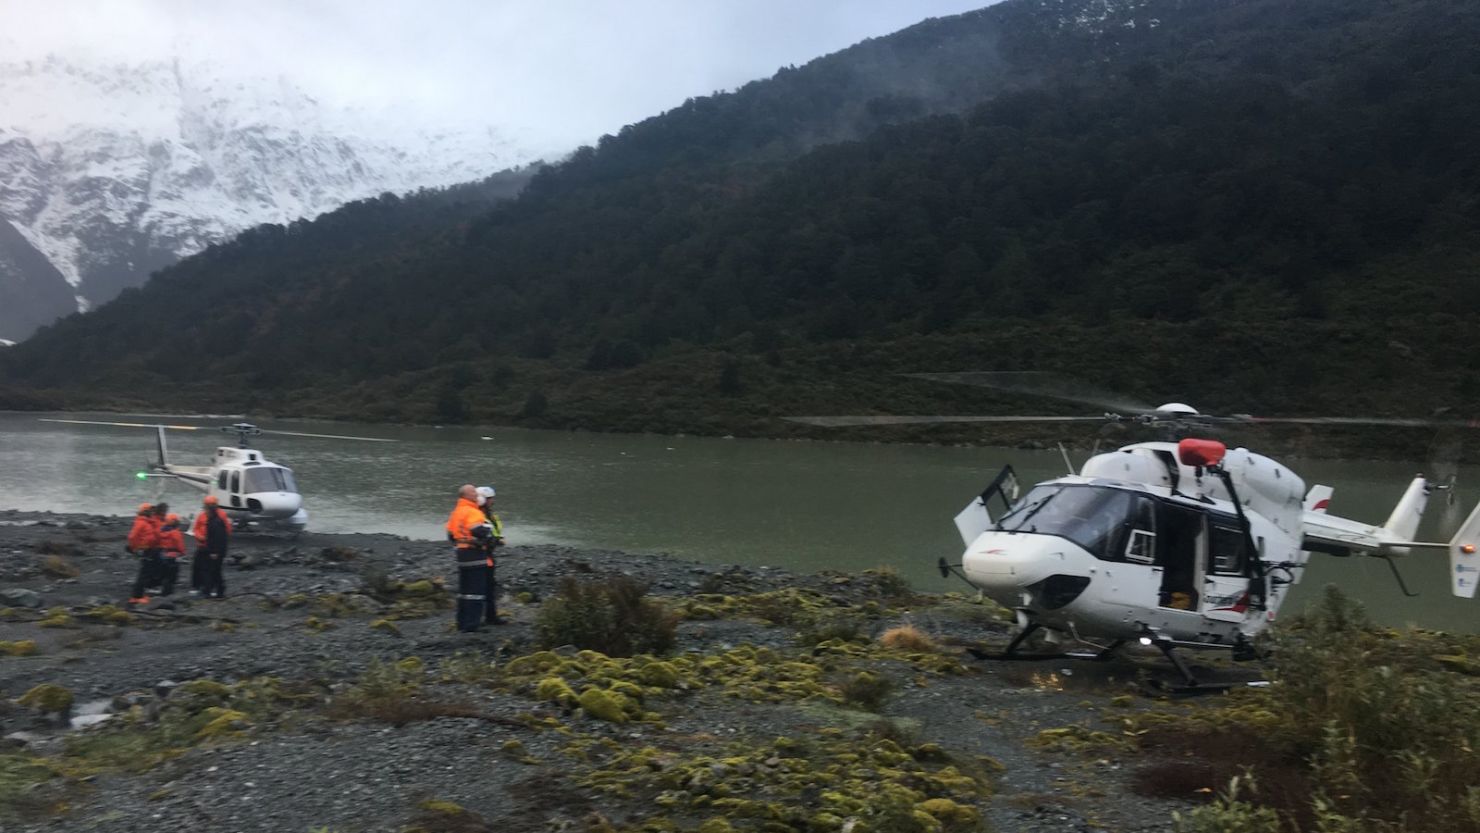 Local tour company Southern Lakes Helicopters had been coordinating with the New Zealand authorities to aid in the rescue effort.